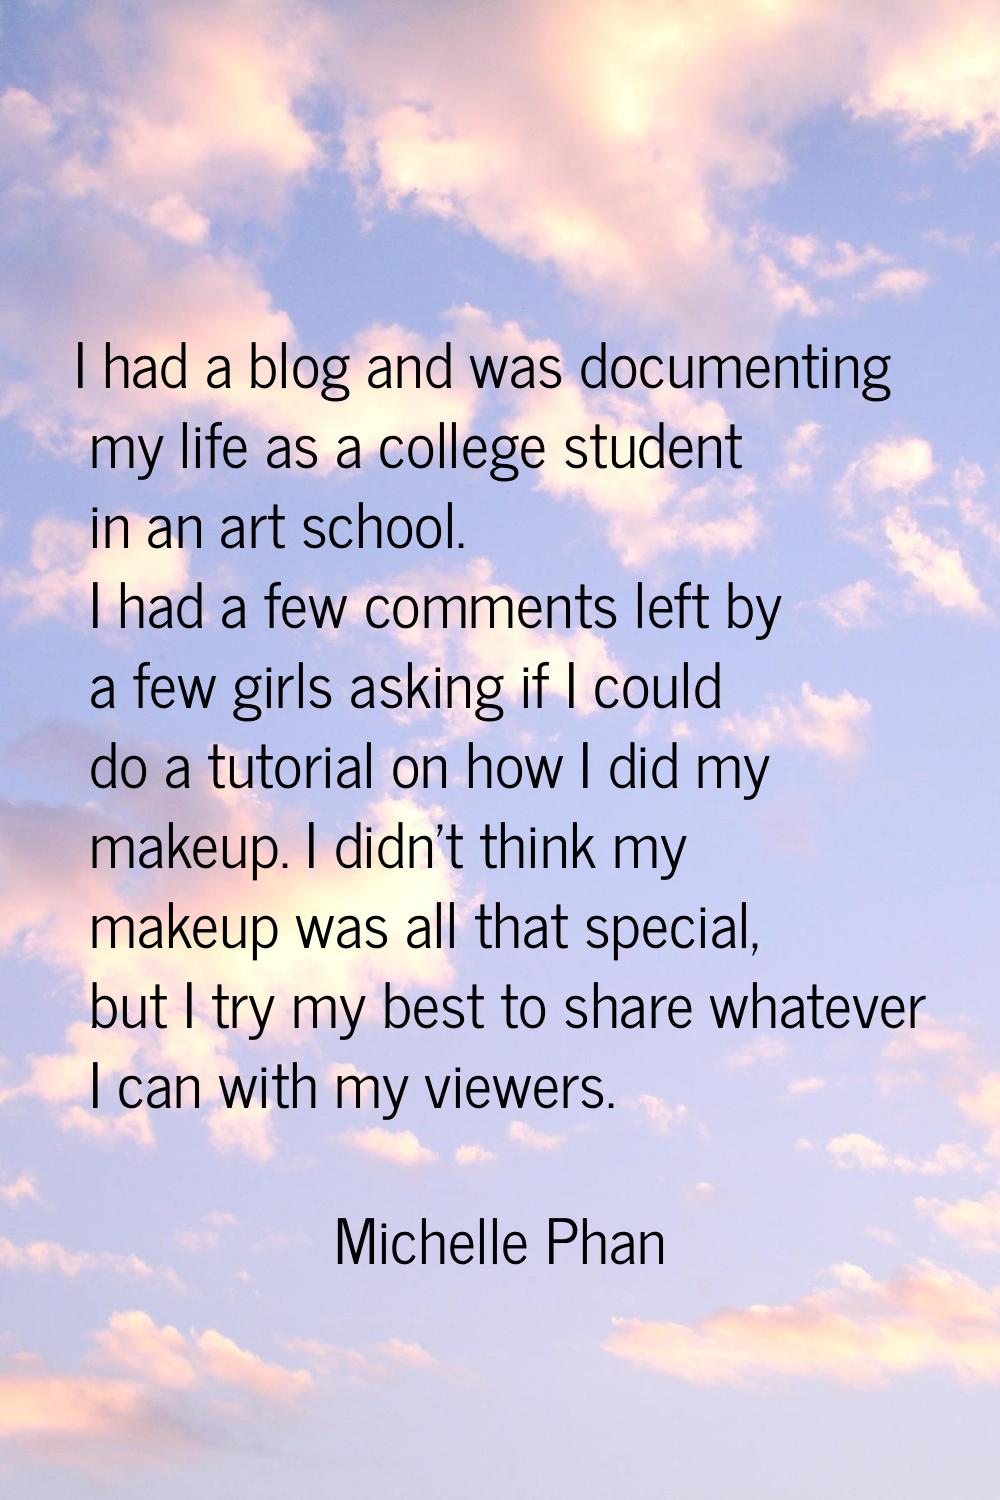 I had a blog and was documenting my life as a college student in an art school. I had a few comment